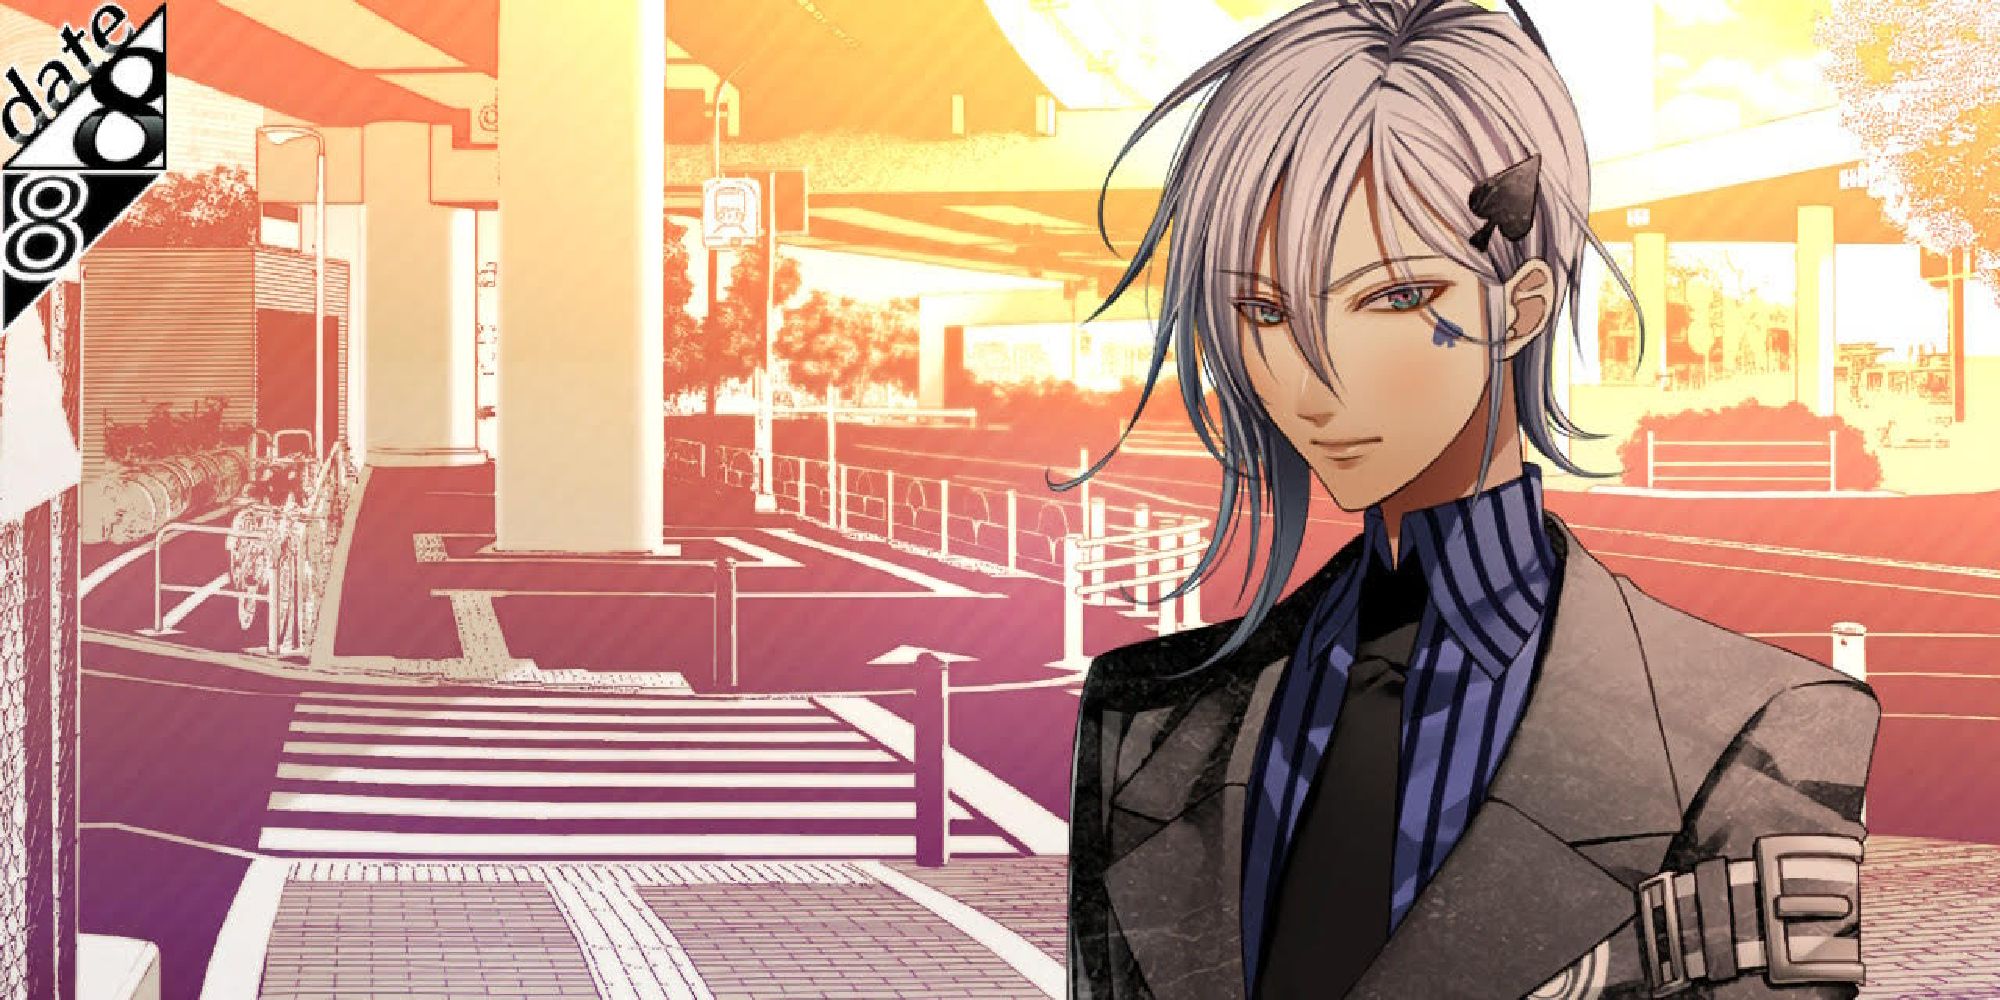 ikki standing outside with mc and blushing